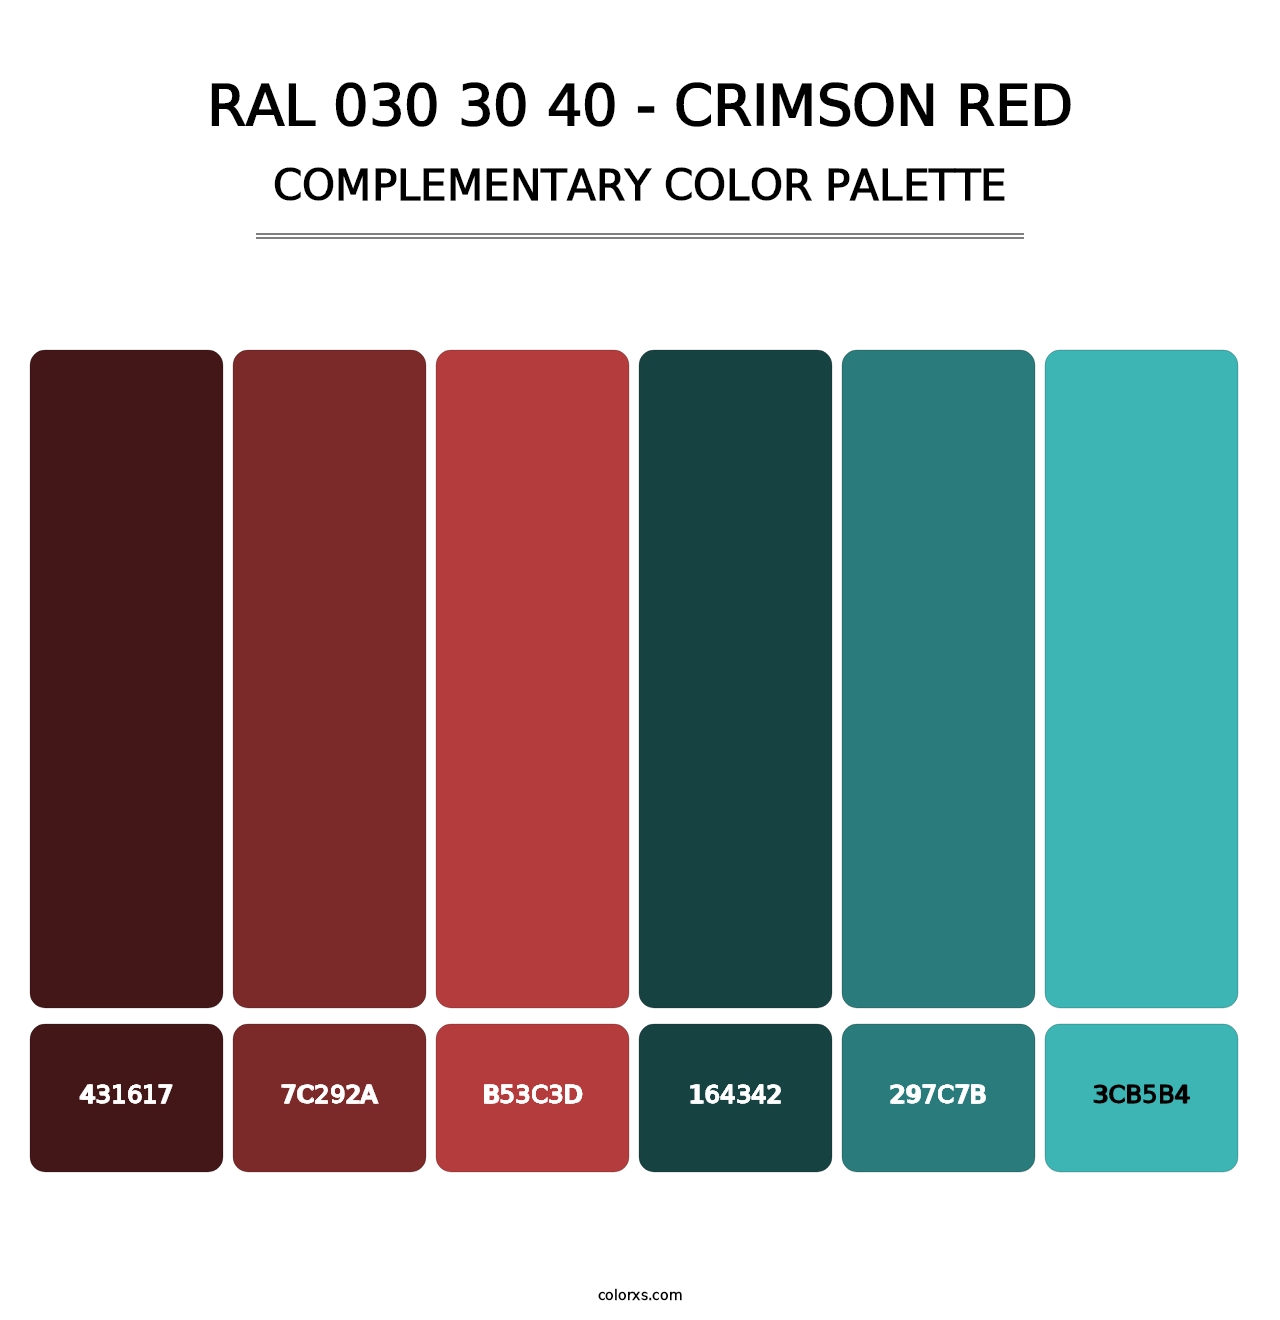 RAL 030 30 40 - Crimson Red - Complementary Color Palette